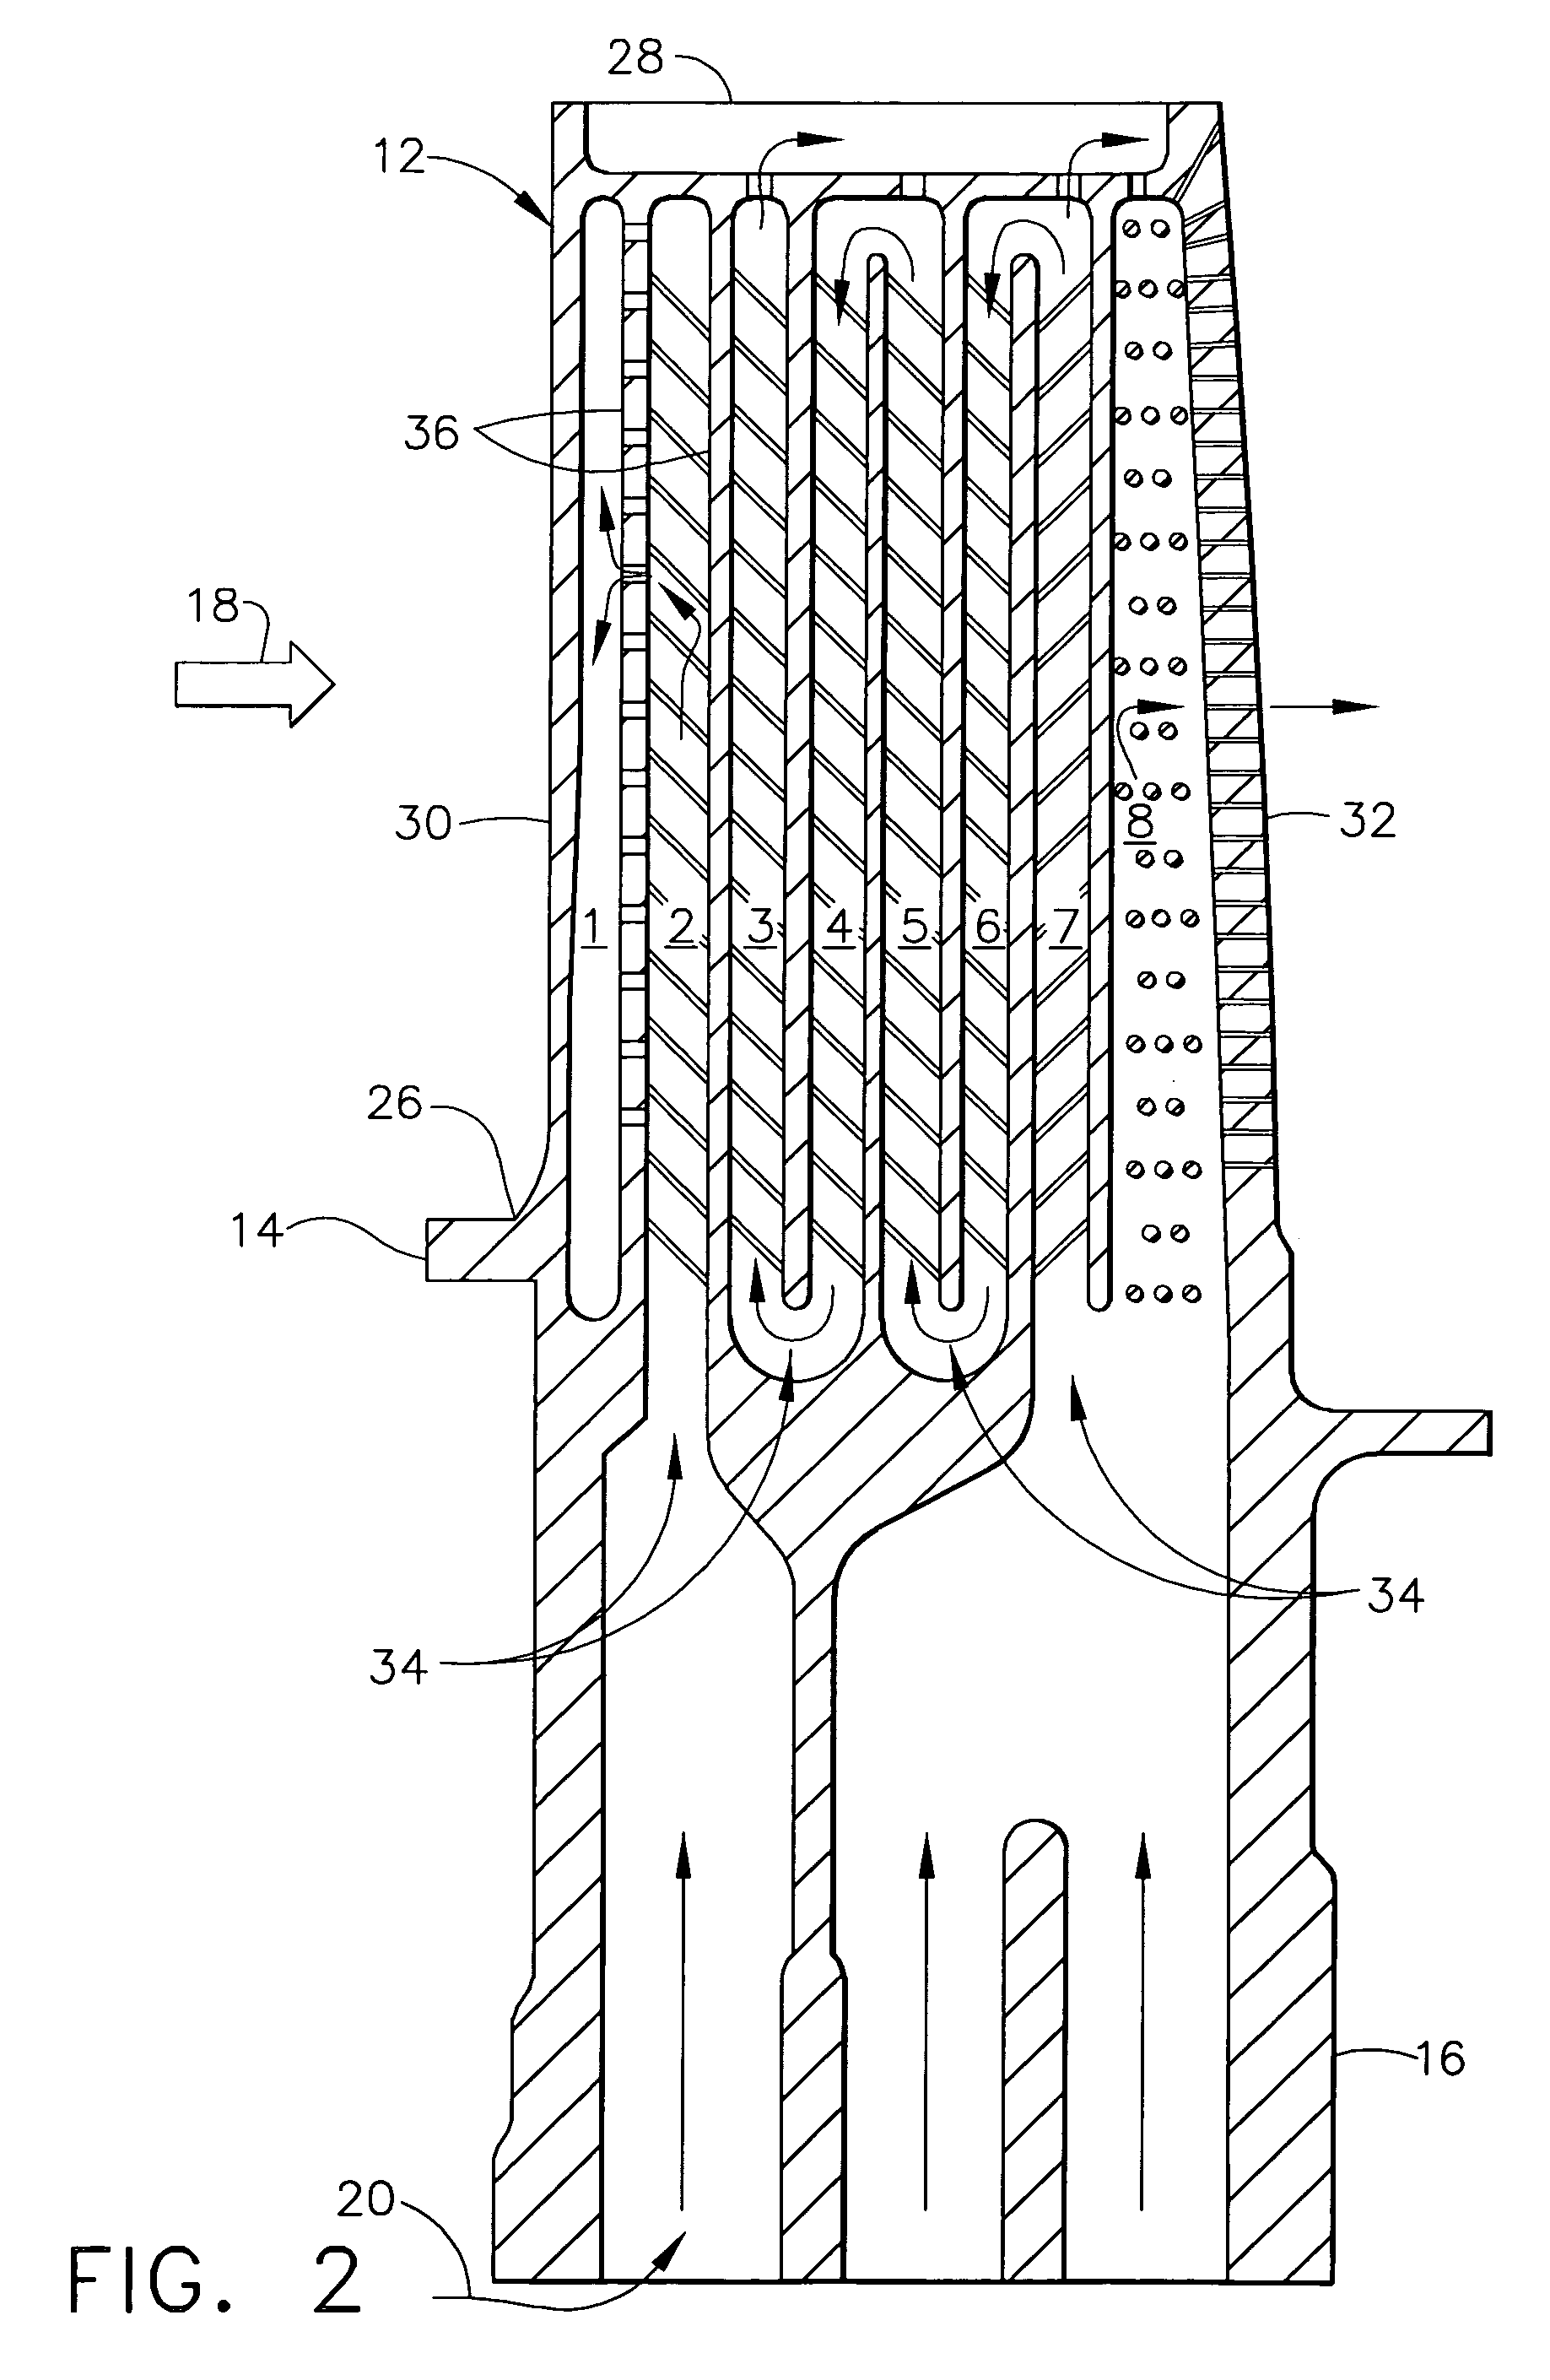 Pattern cooled turbine airfoil